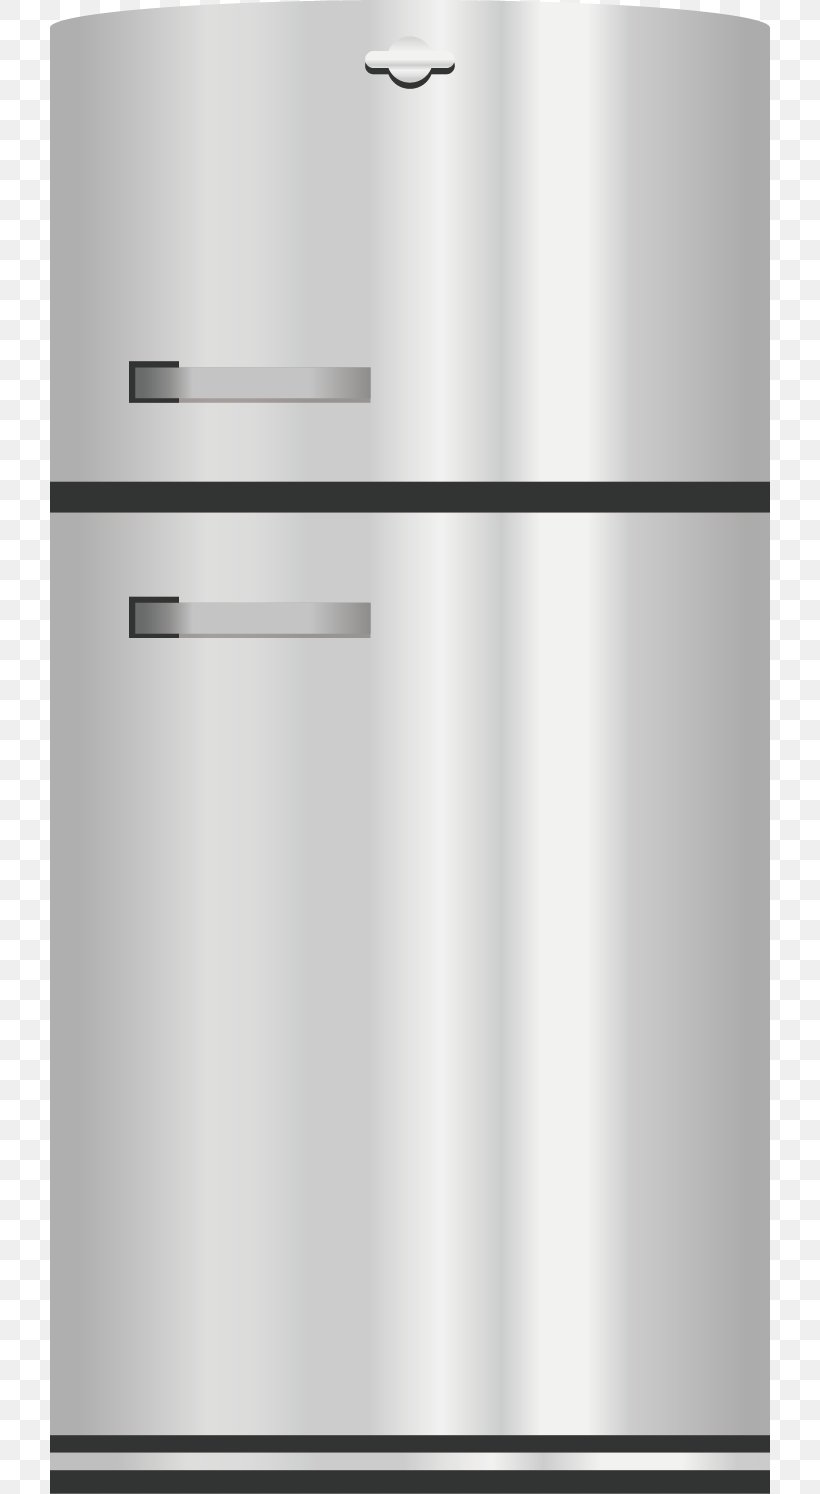 Major Appliance Black And White Home Appliance, PNG, 720x1494px, Major Appliance, Black, Black And White, Home Appliance, Kitchen Download Free